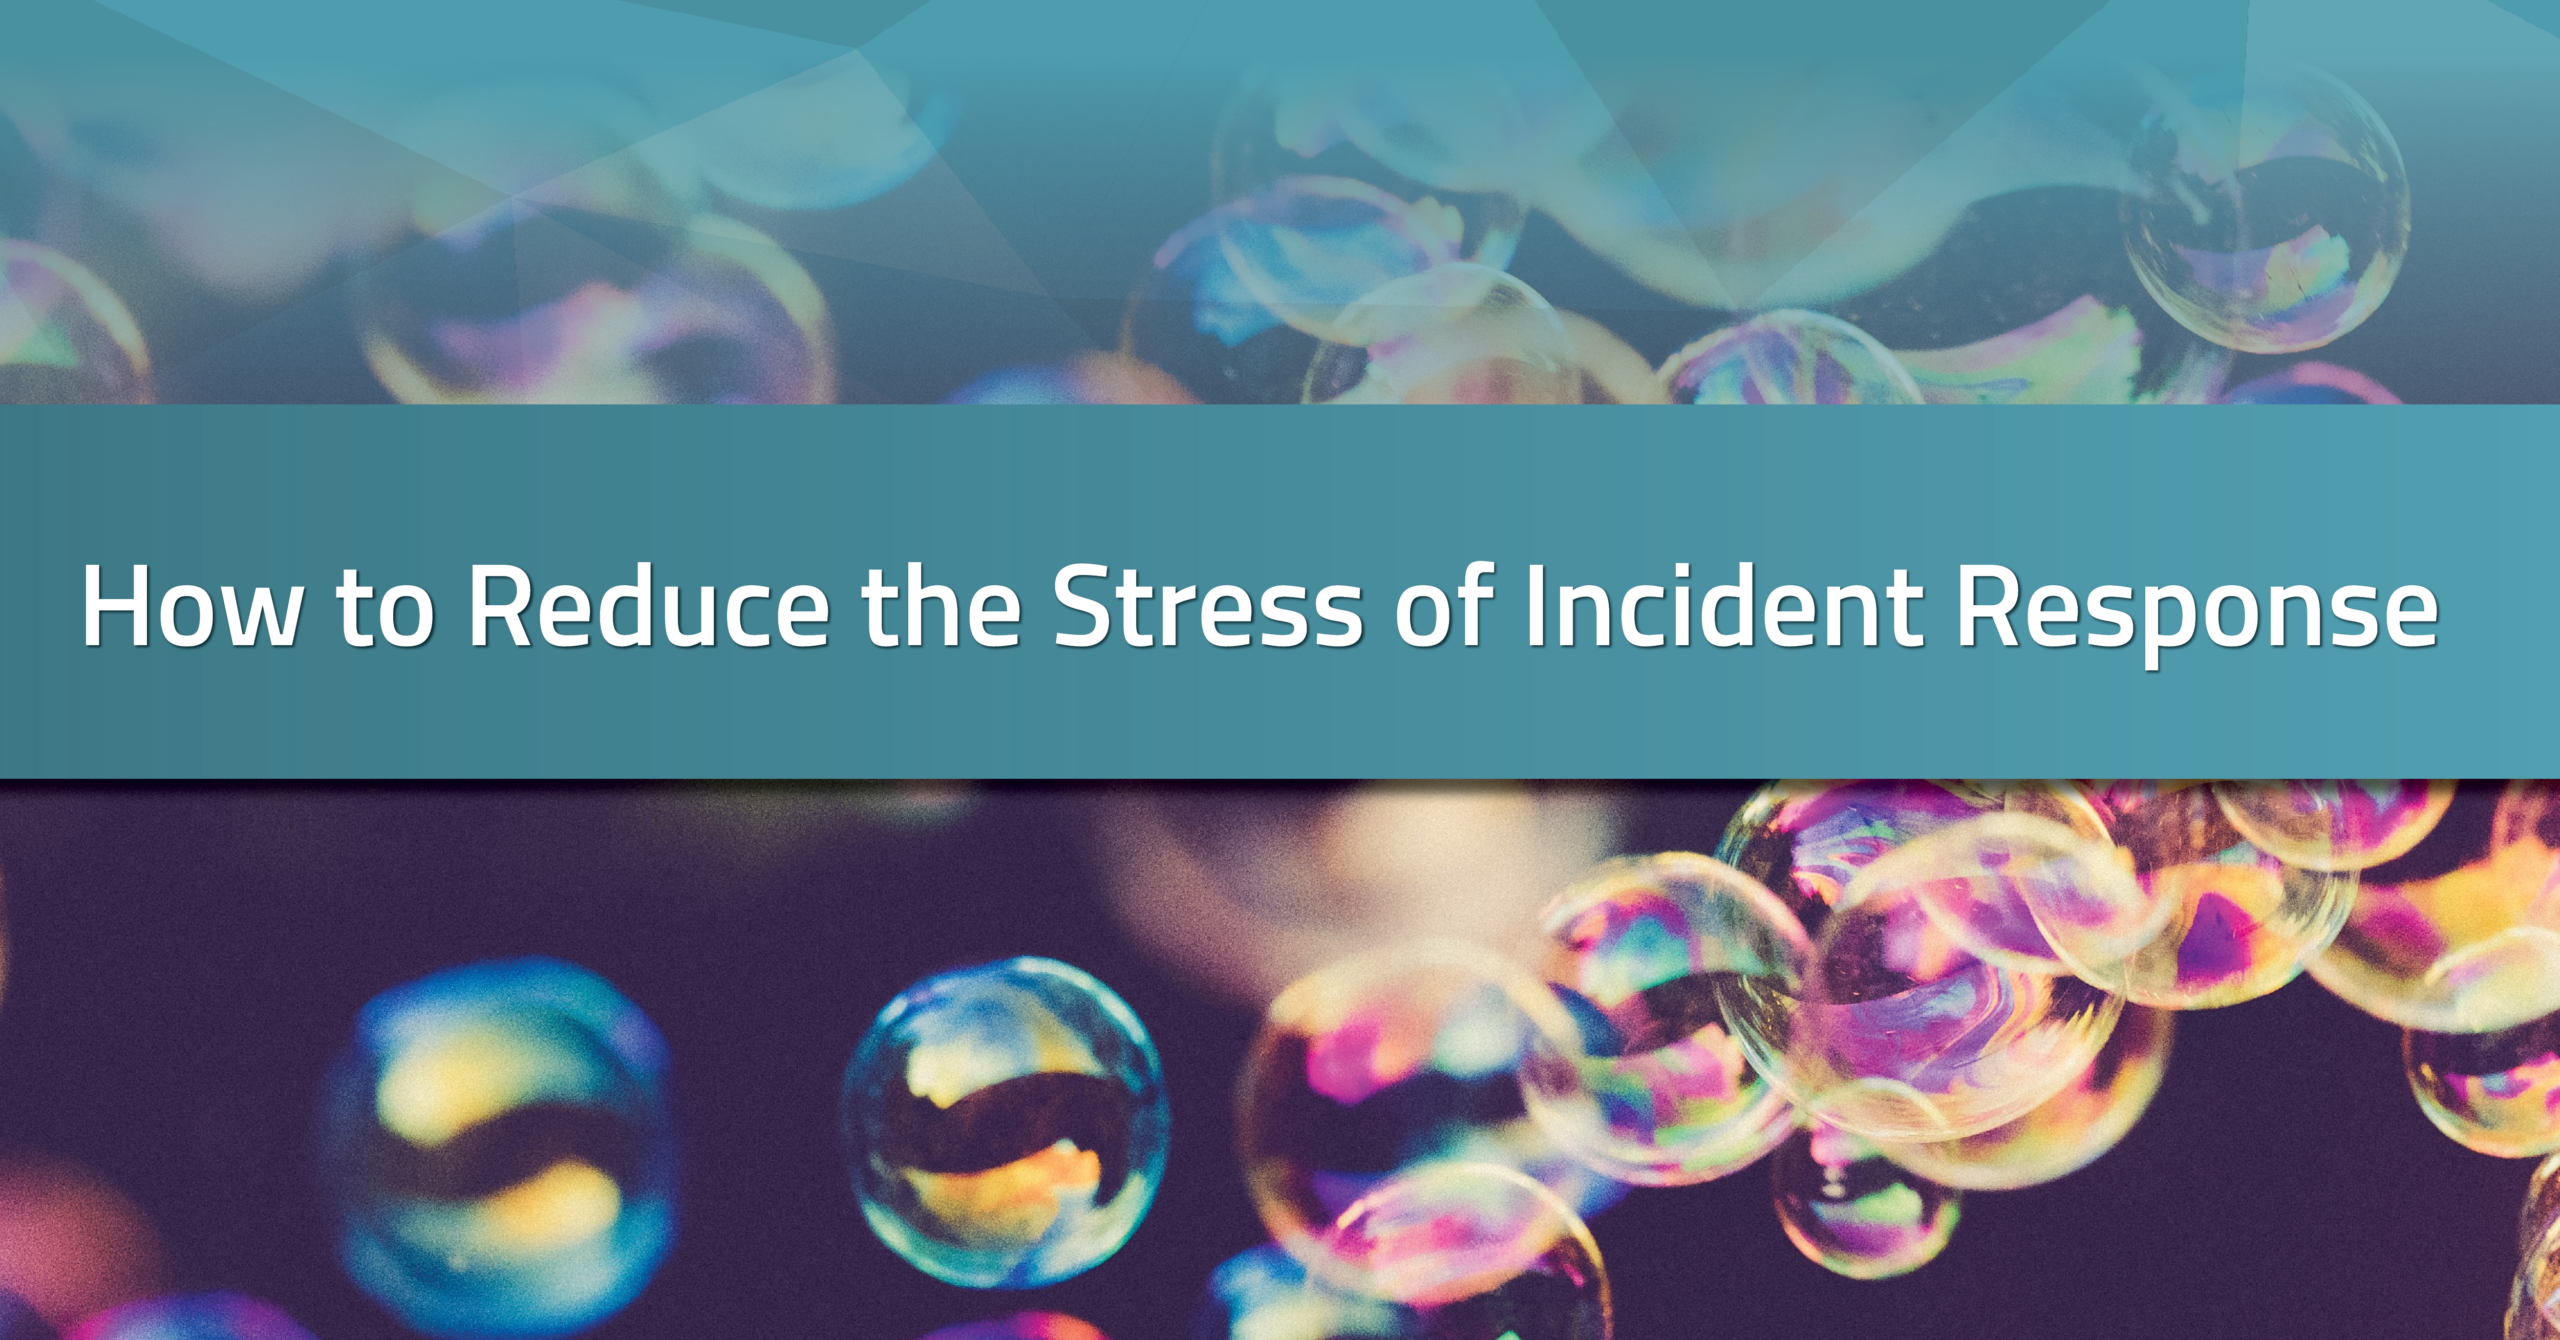 How to Reduce the Stress of Incident Response